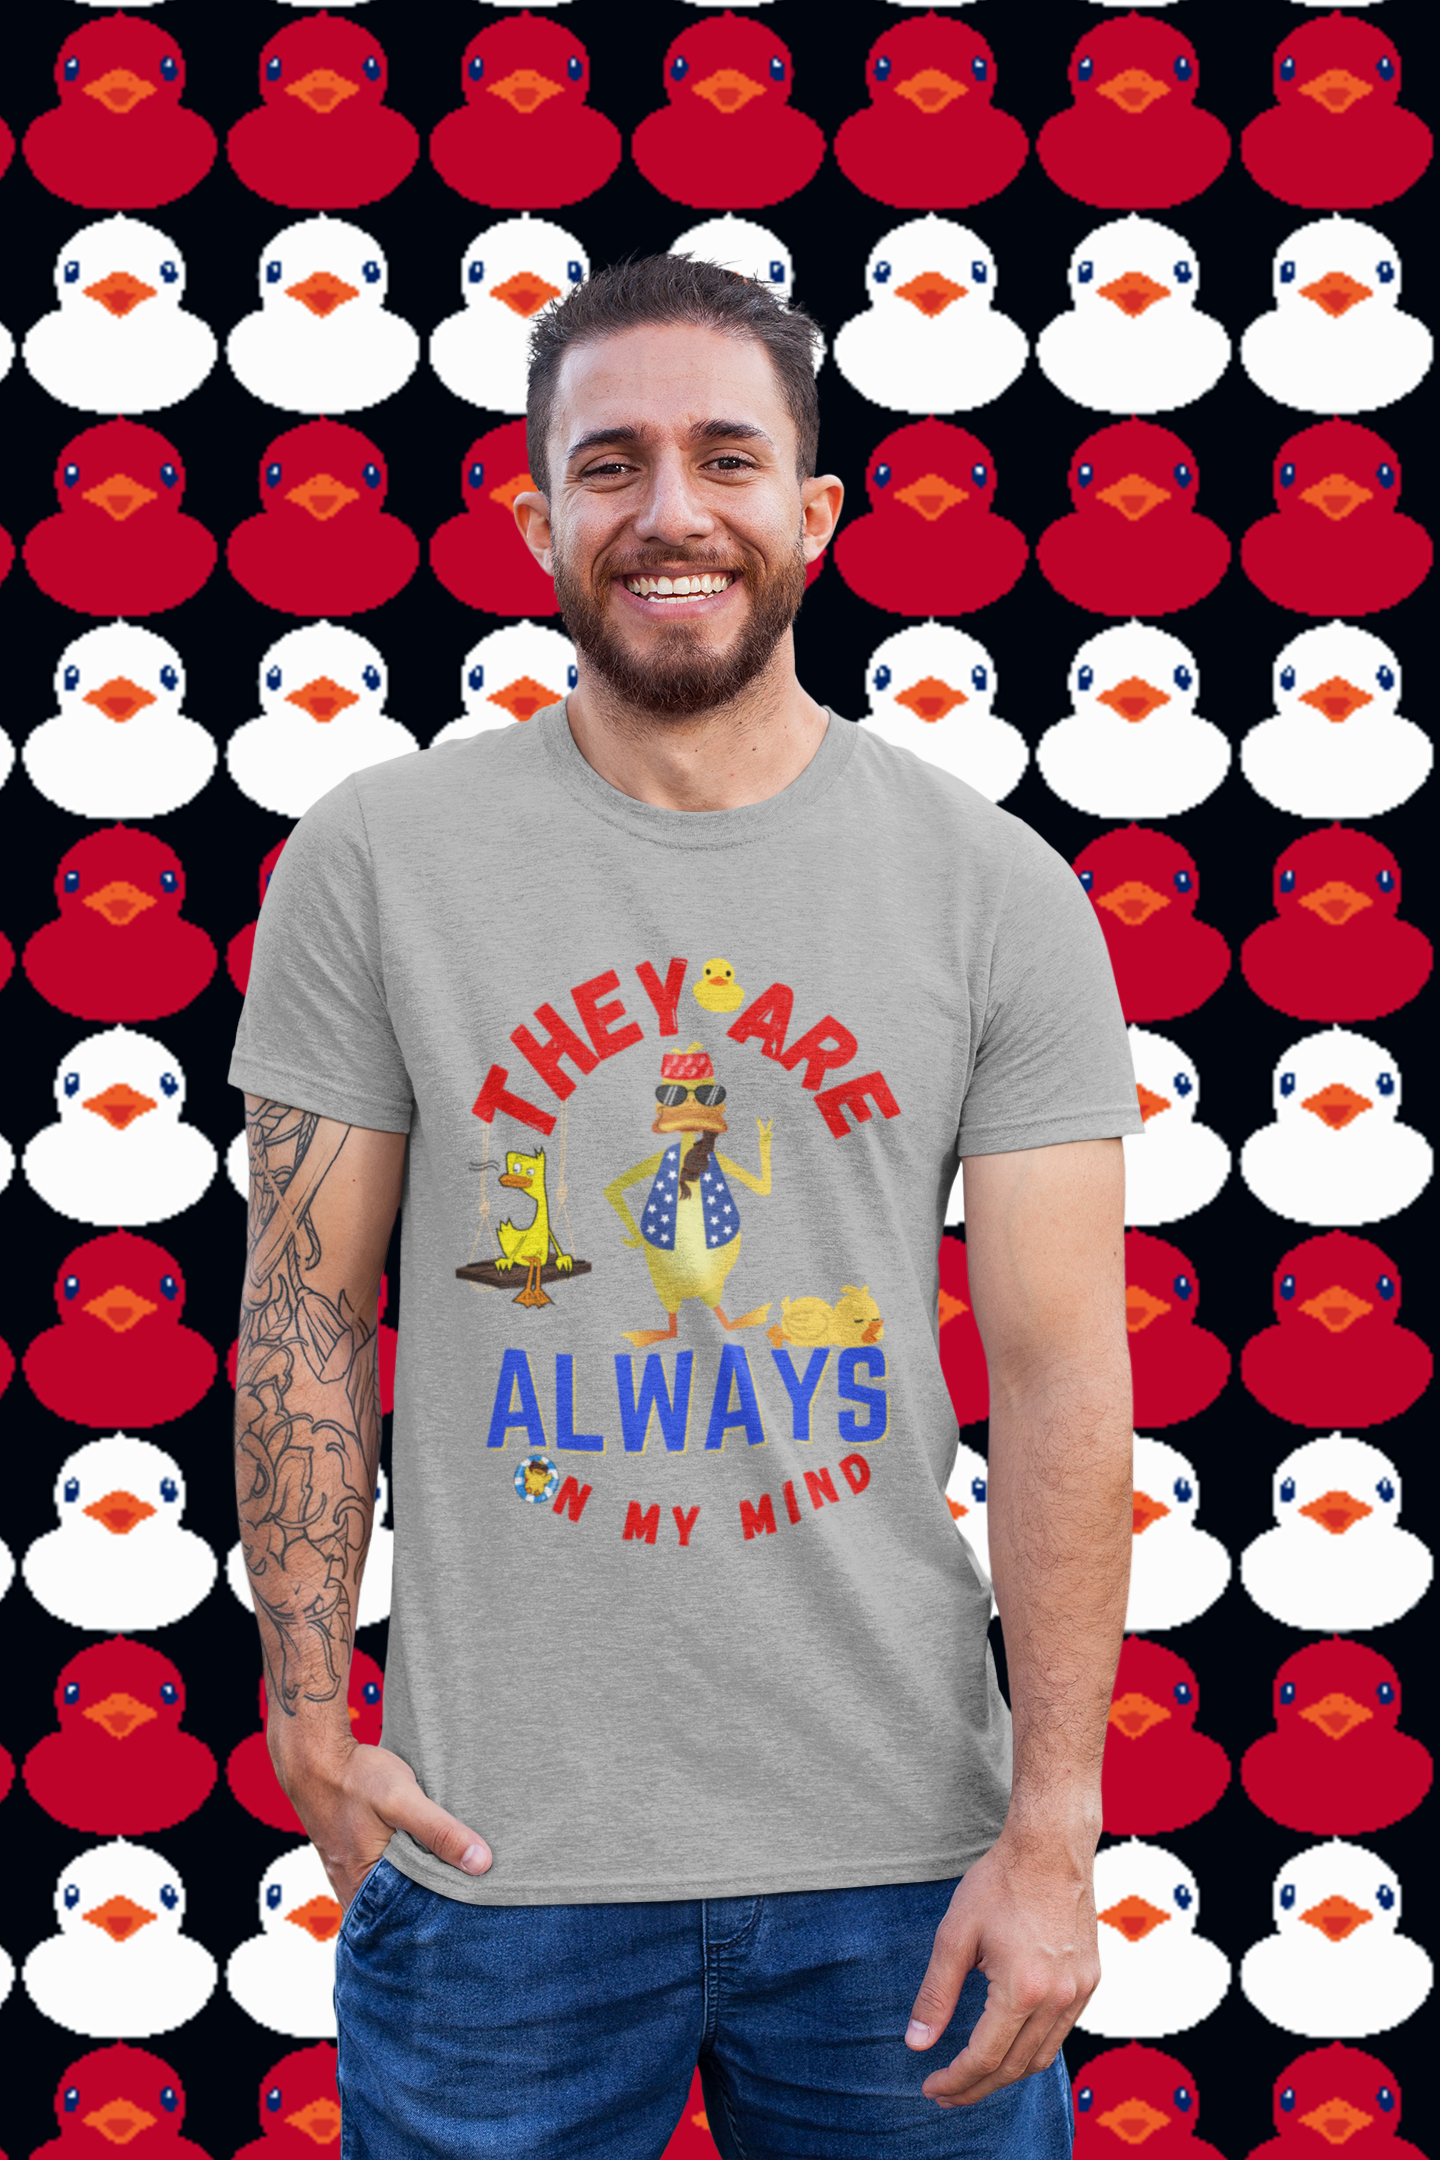 Ducks - They are Always on My Mind T-Shirt